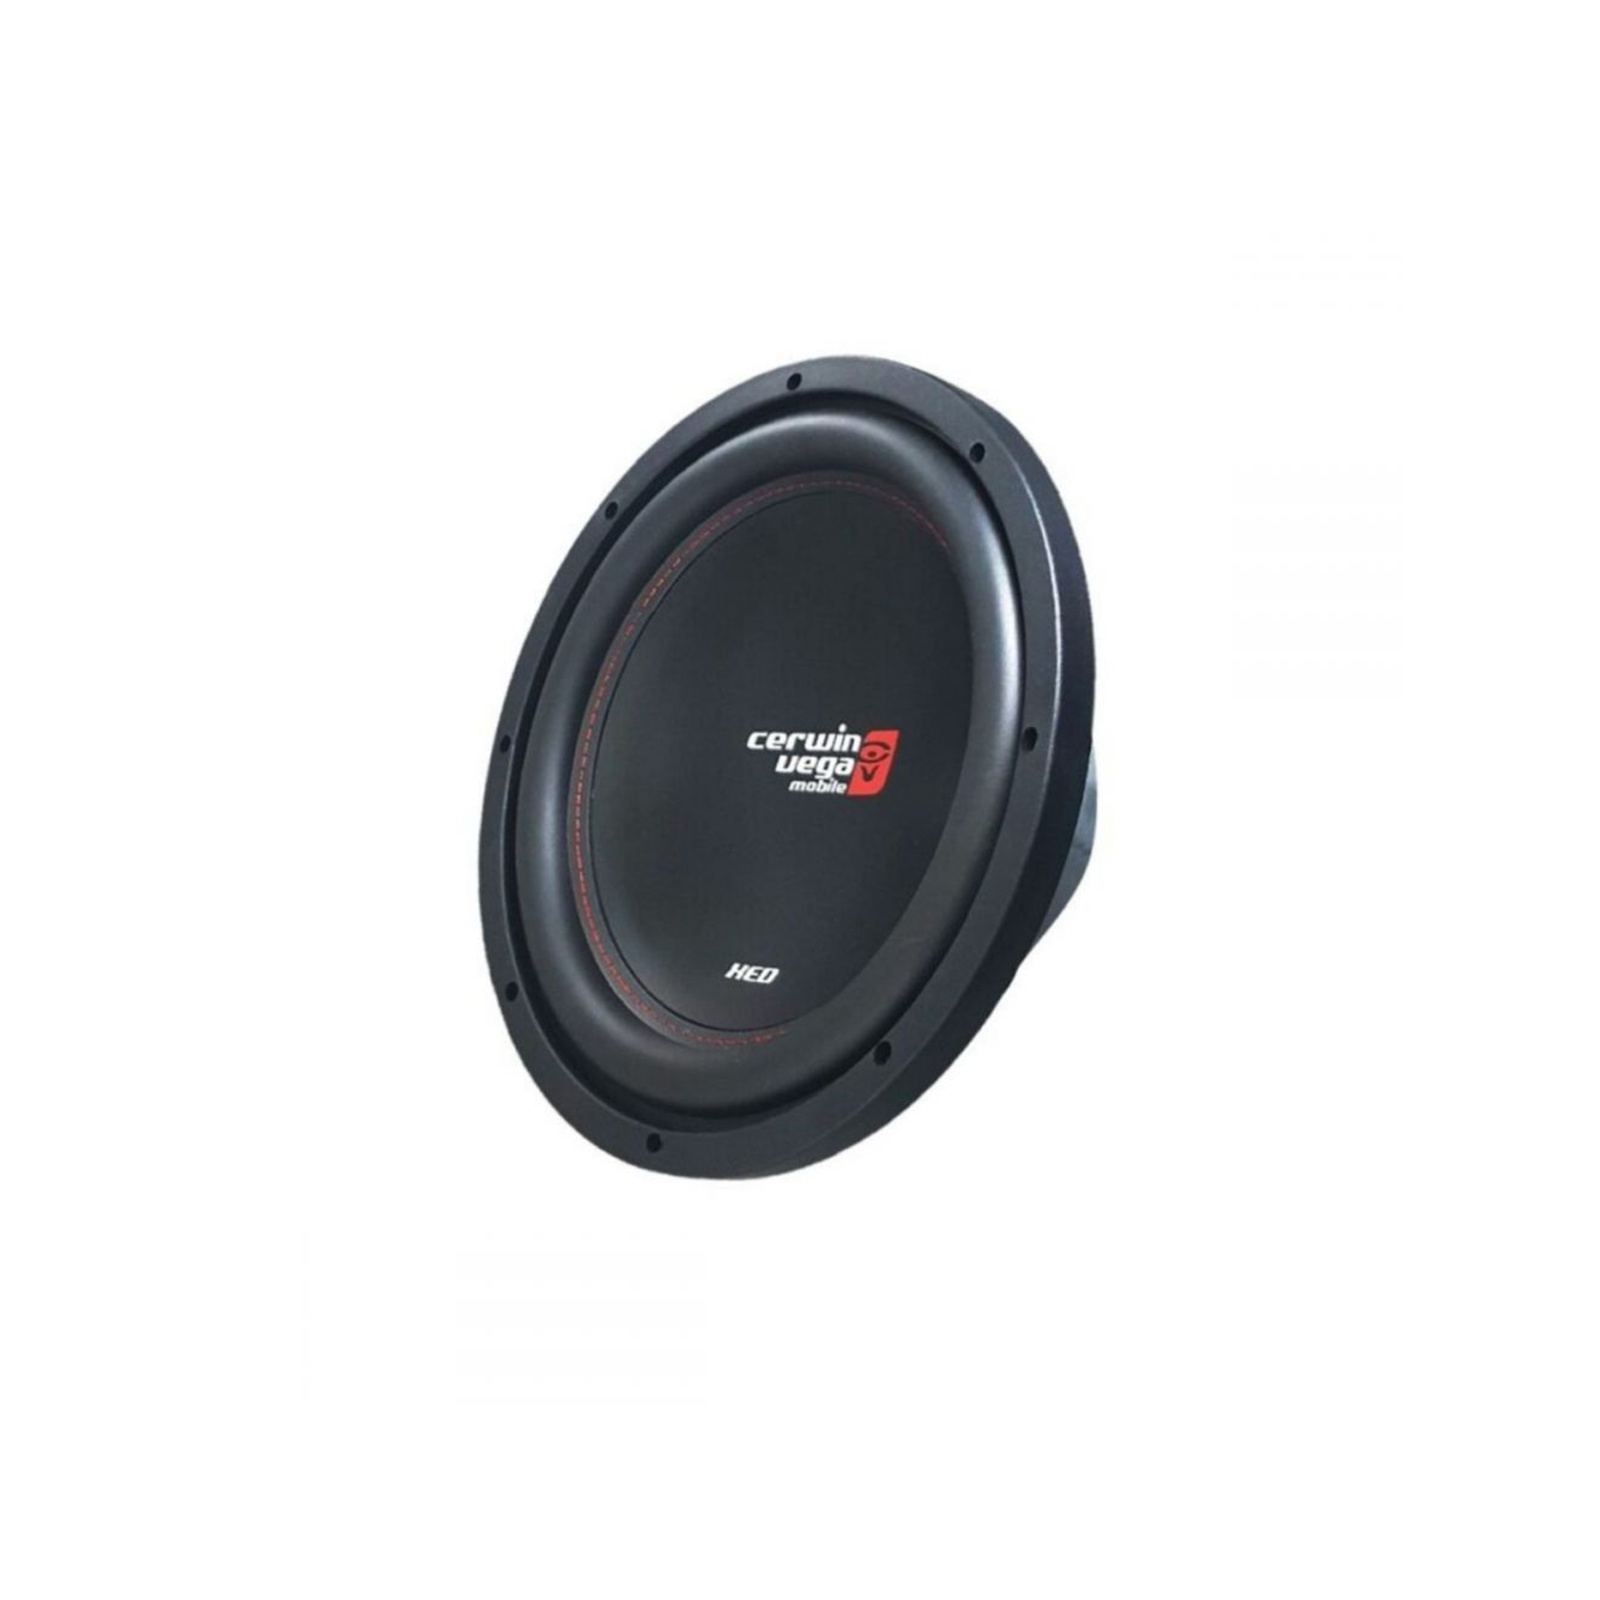 Buy the Cerwin-Vega XED10V2 10" XED SERIES 4 OHM SVC SUBWOOFER 800W (  XED10V2 ) online - PBTech.com